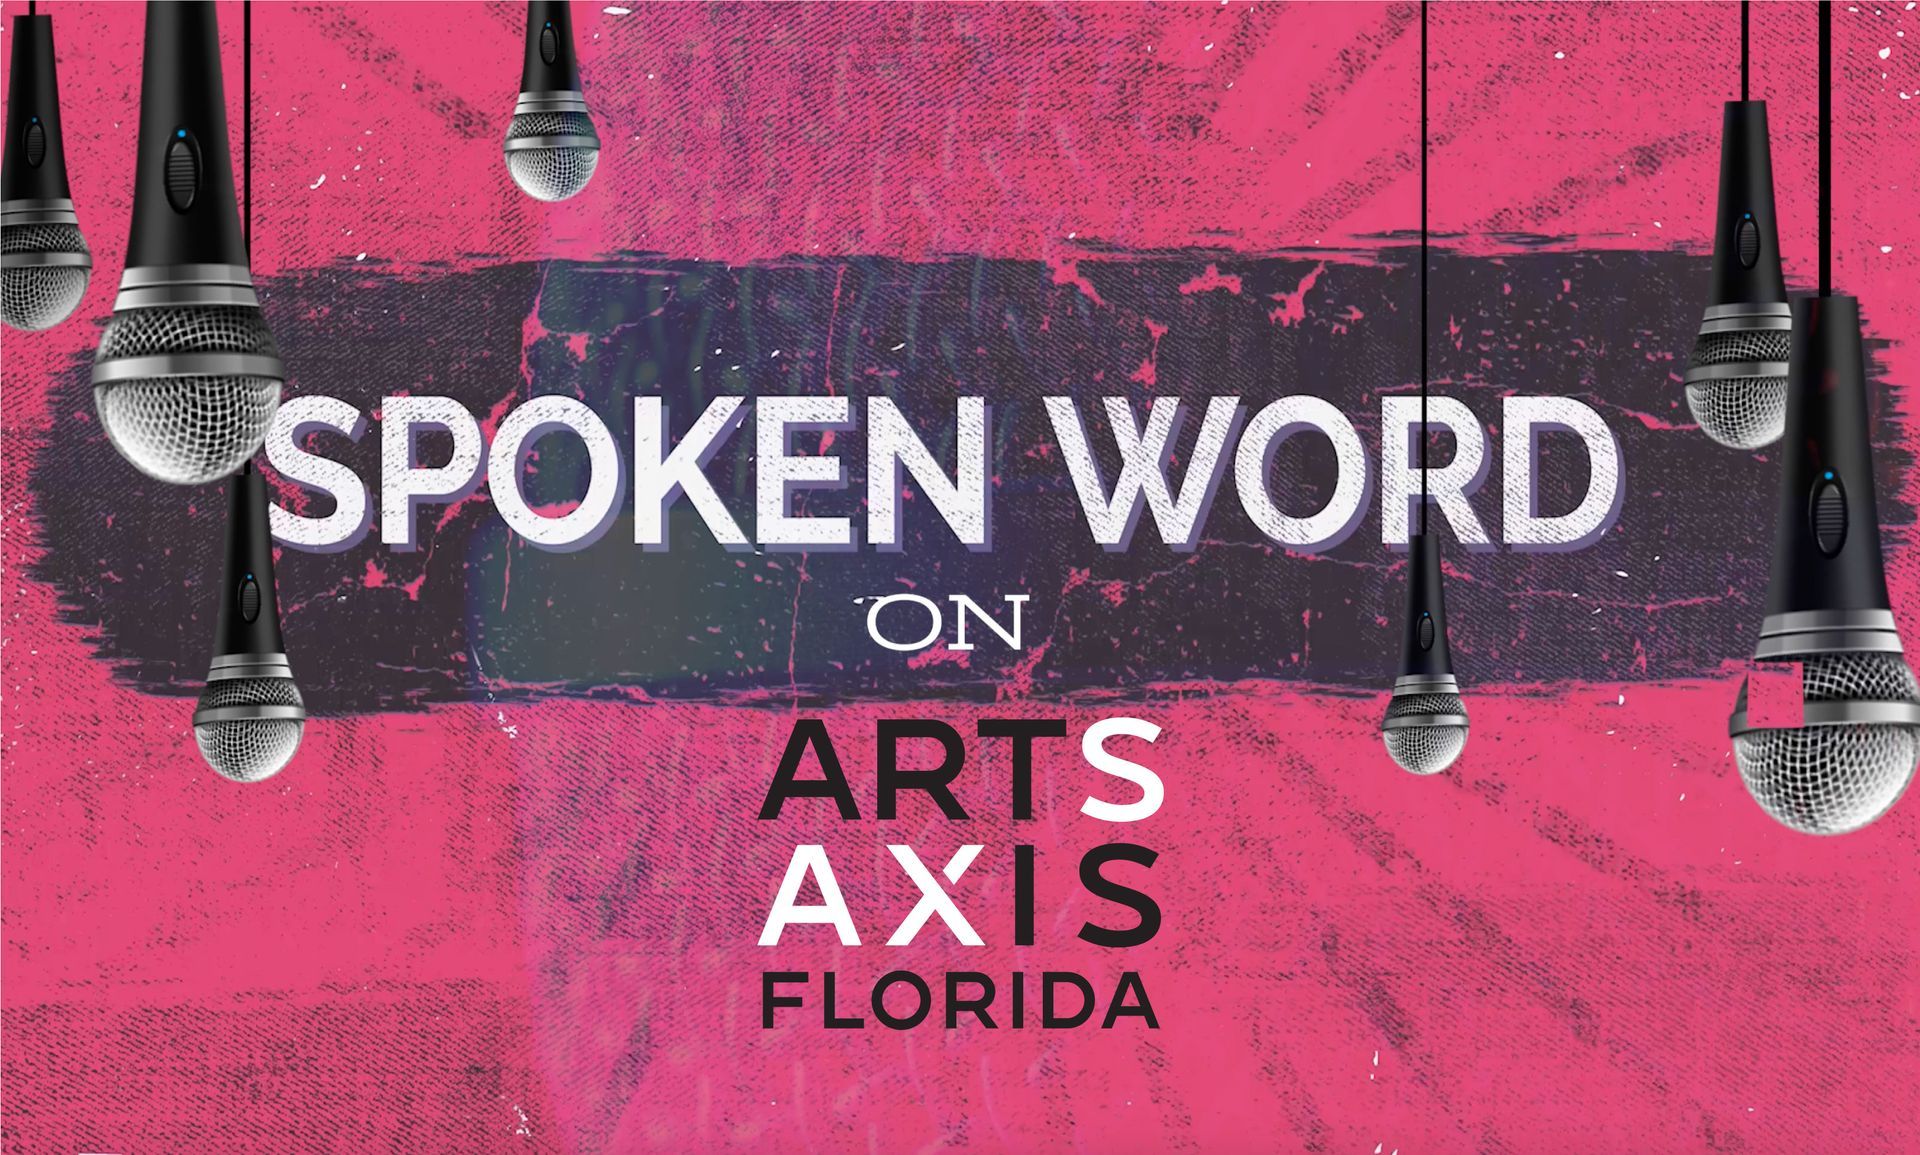 a poster for spoken word on arts axis florida